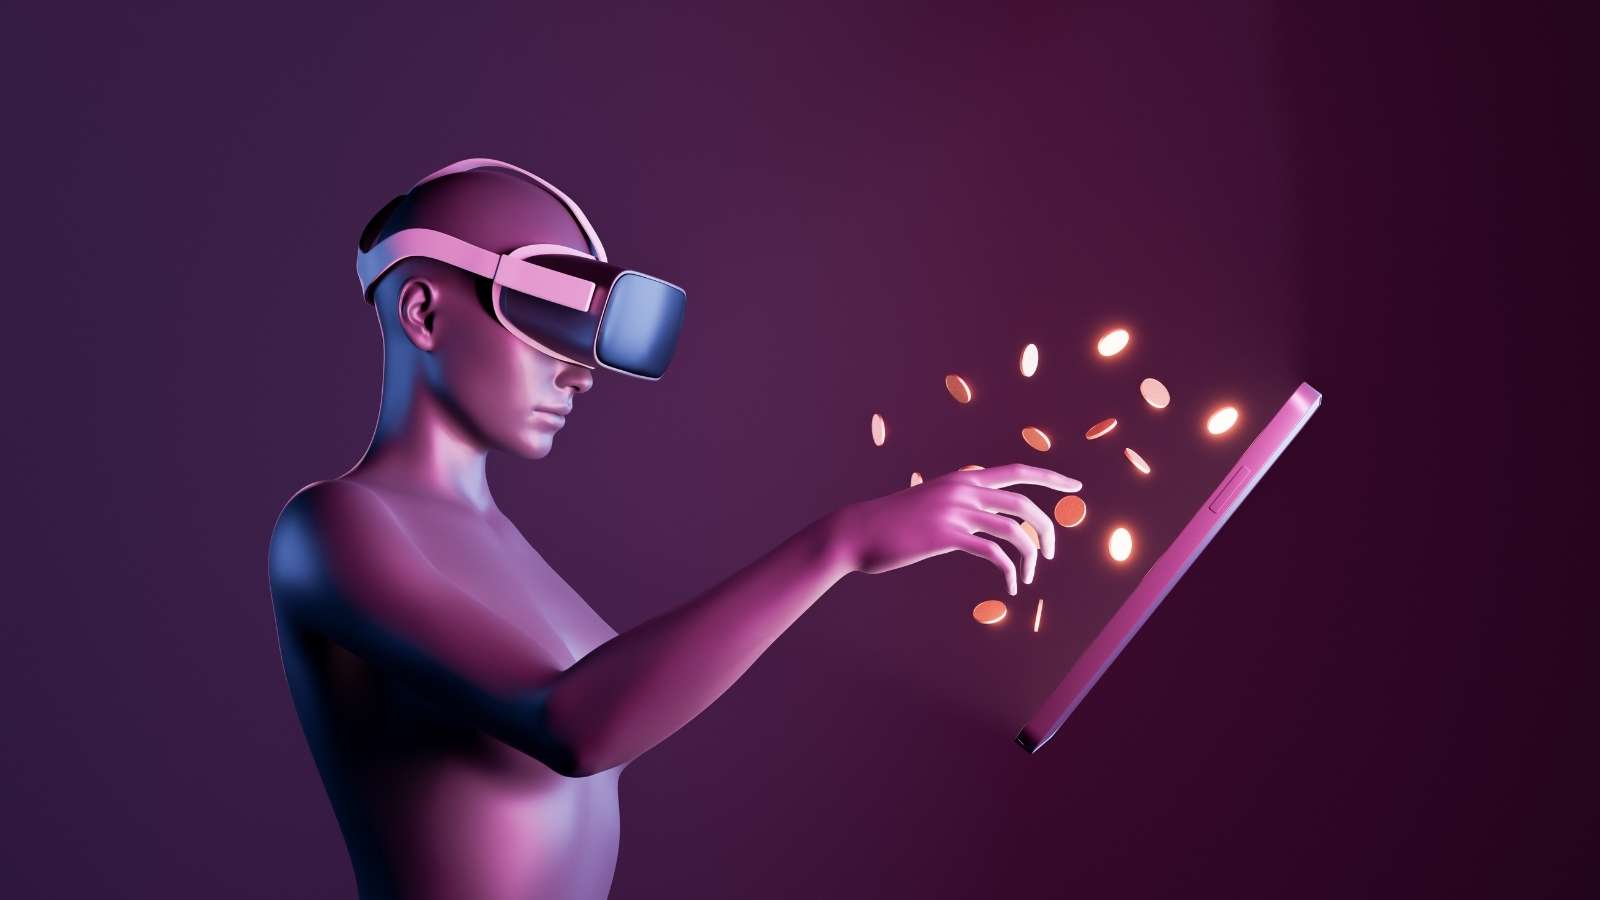 How will ad agencies adapt to the metaverse